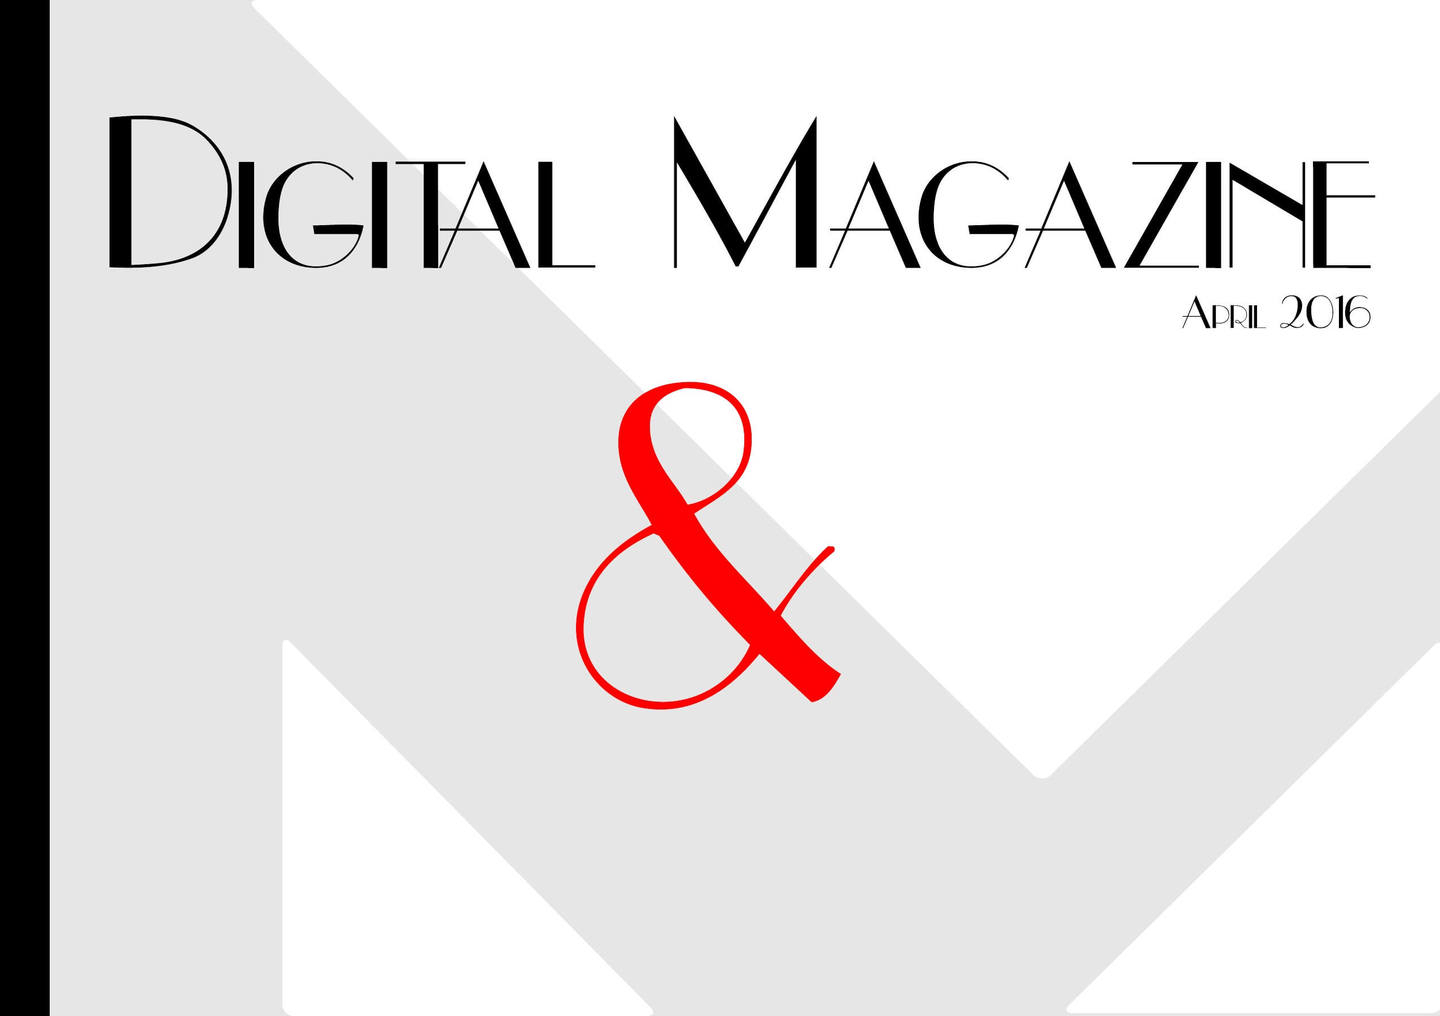 Free Magazine Templates + Magazine Cover Designs Intended For Blank Magazine Template Psd